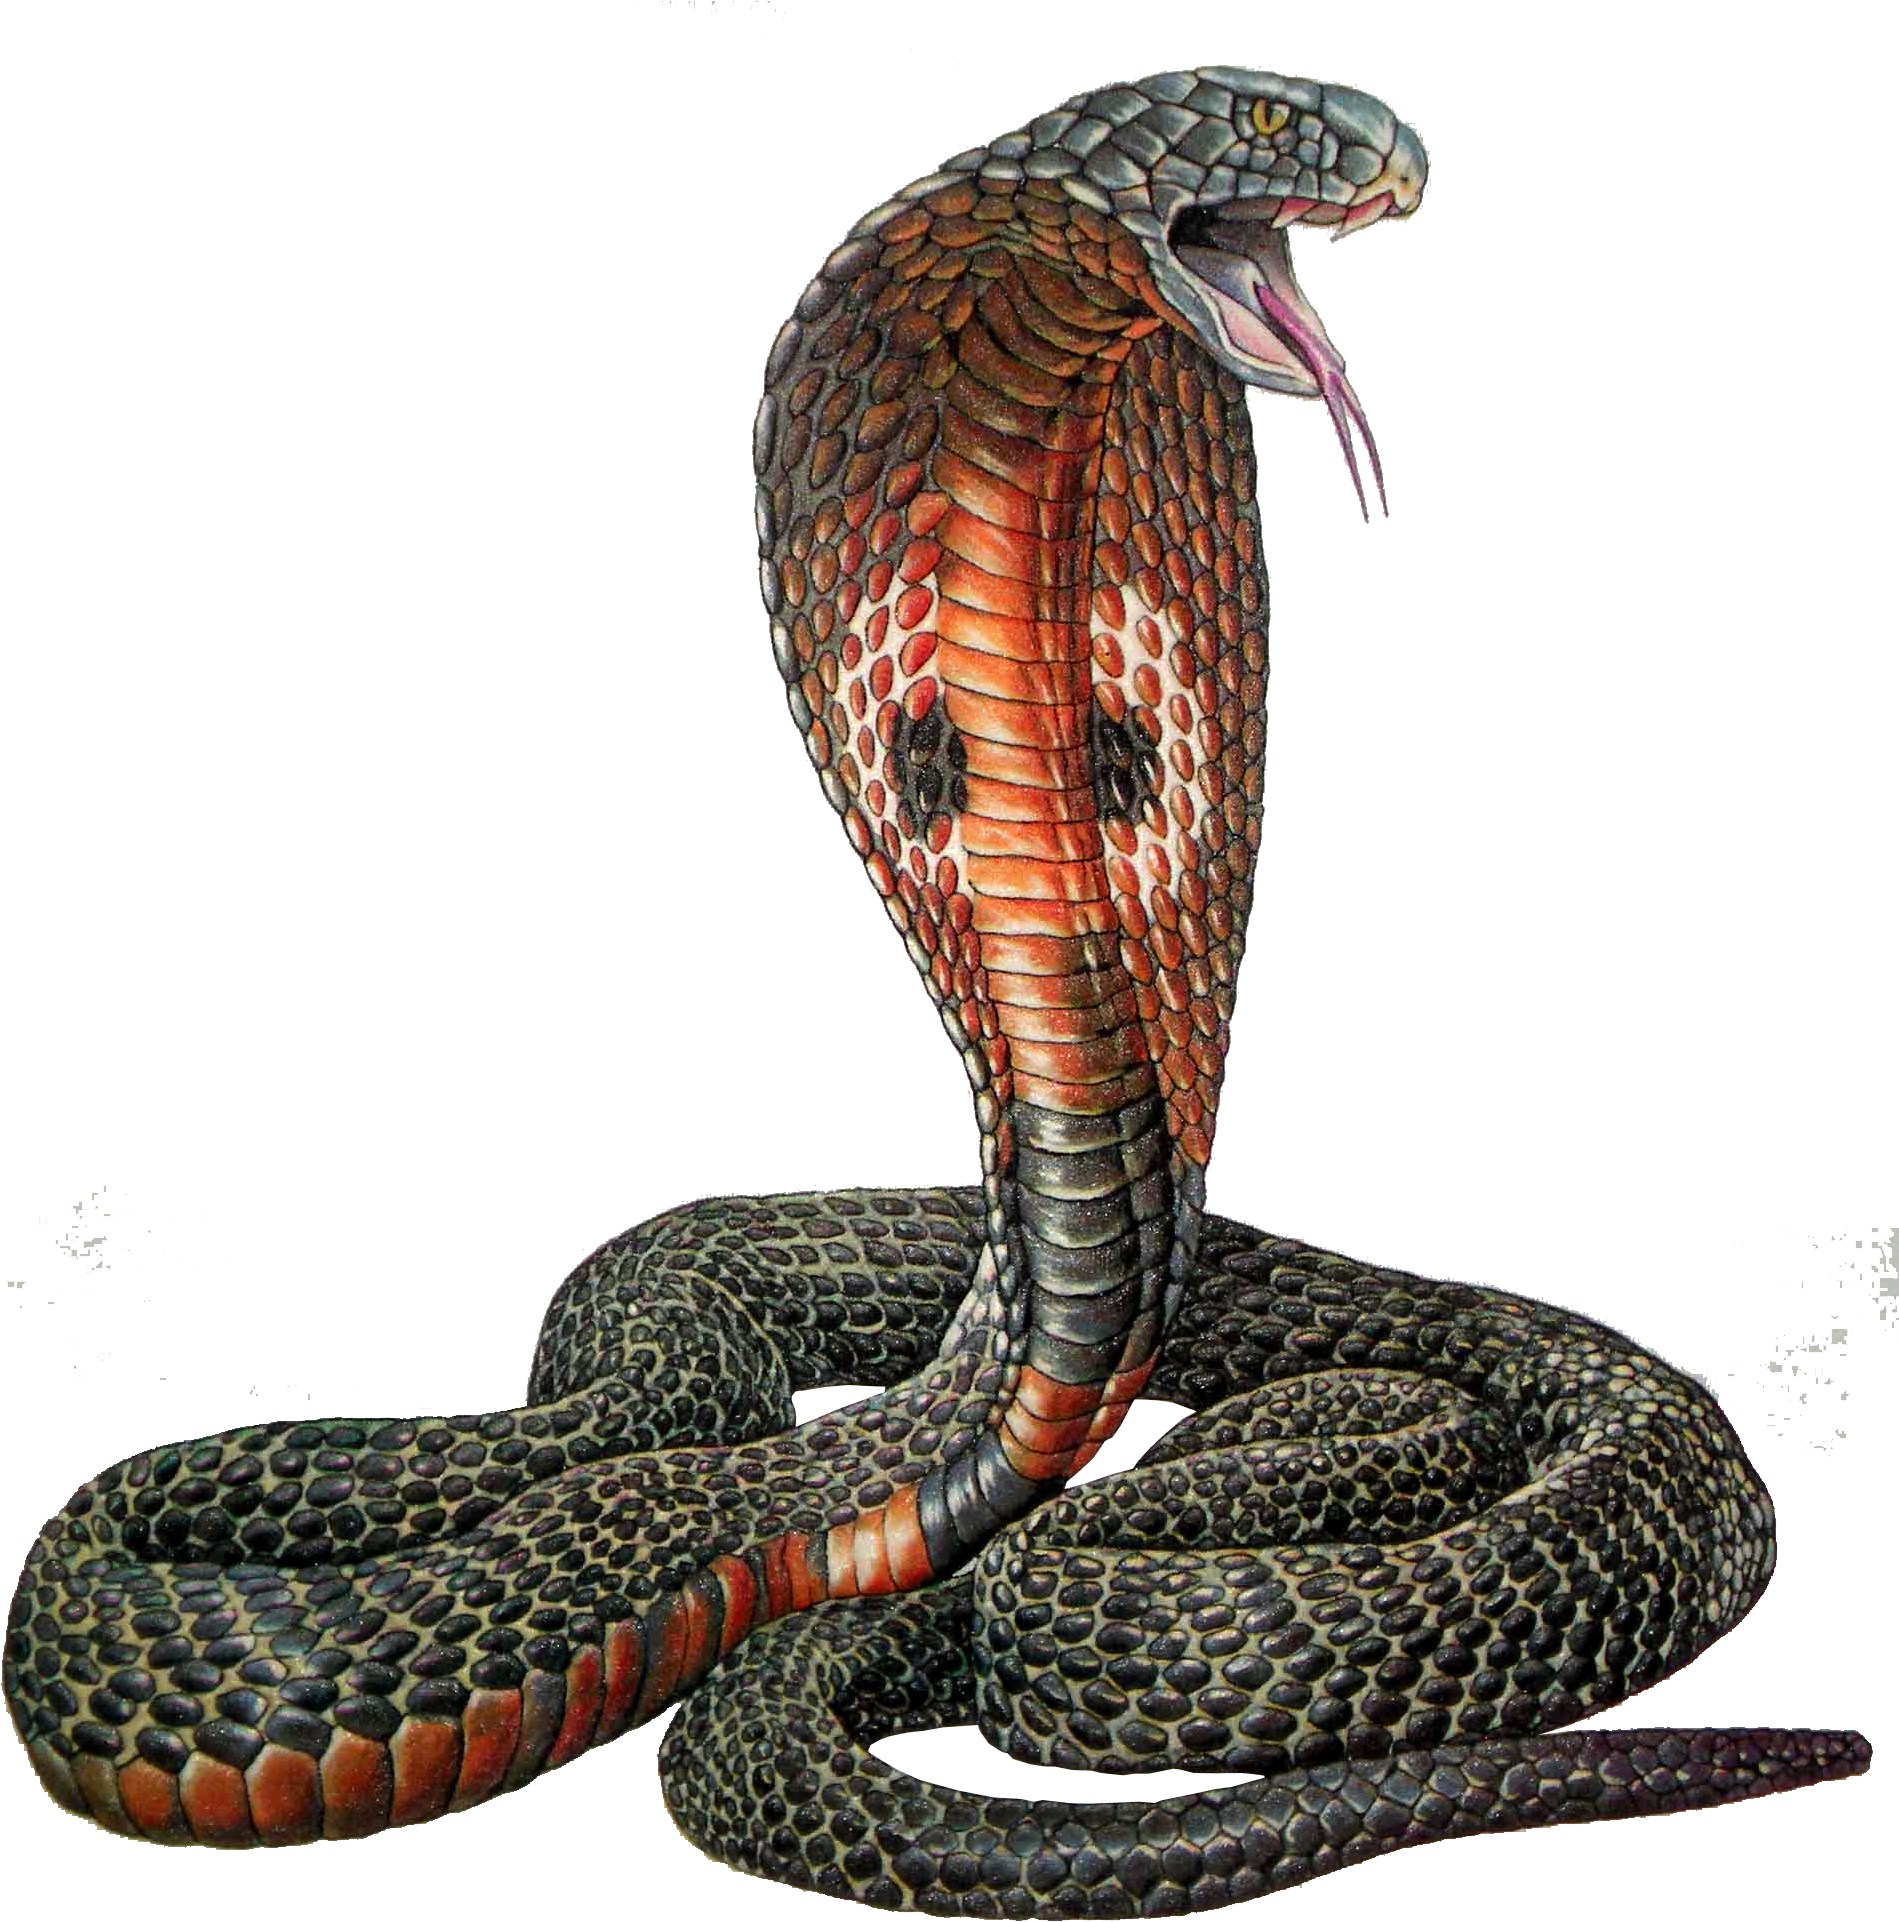 A Snake With Its Mouth Open